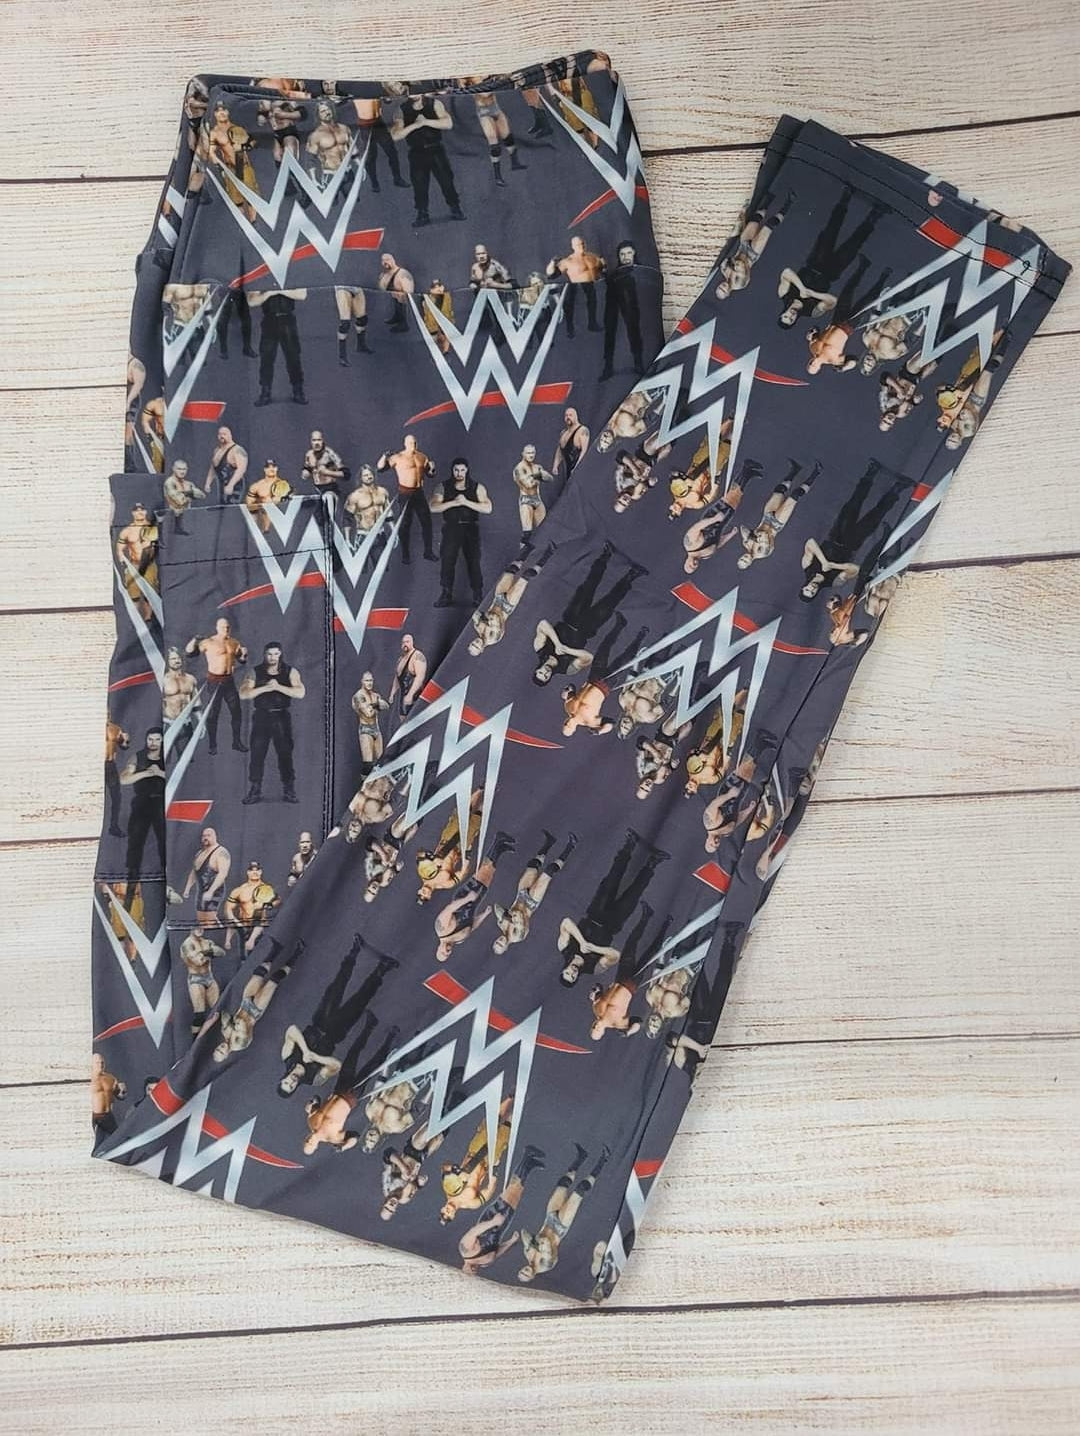 WWE leggings and Capris with pockets